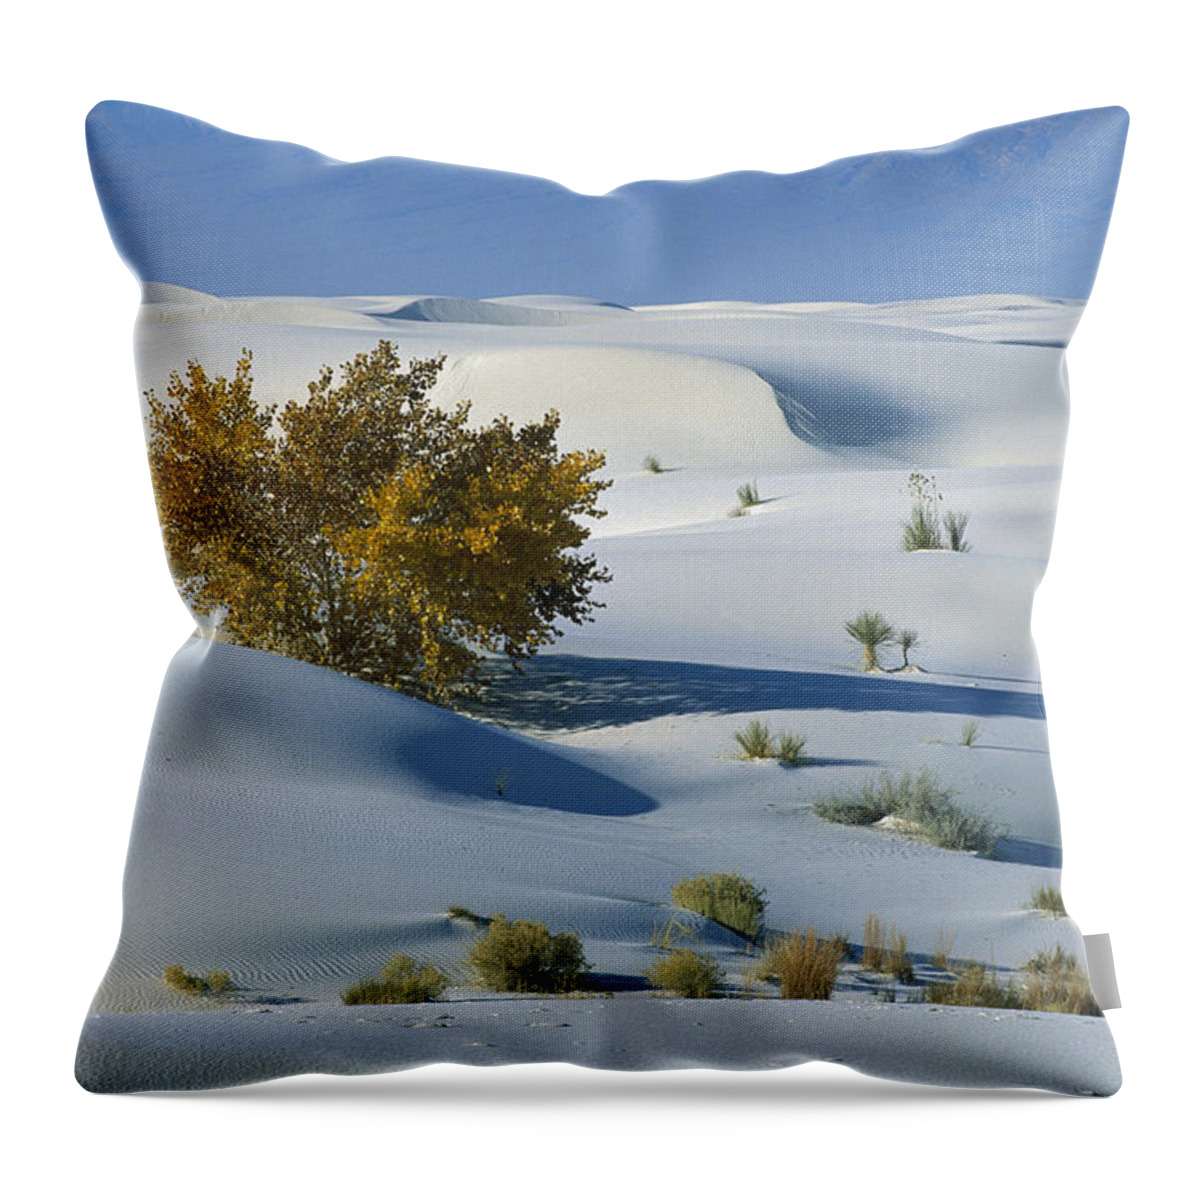 00198316 Throw Pillow featuring the photograph Fremont Cottonwood at White Sands by Konrad Wothe